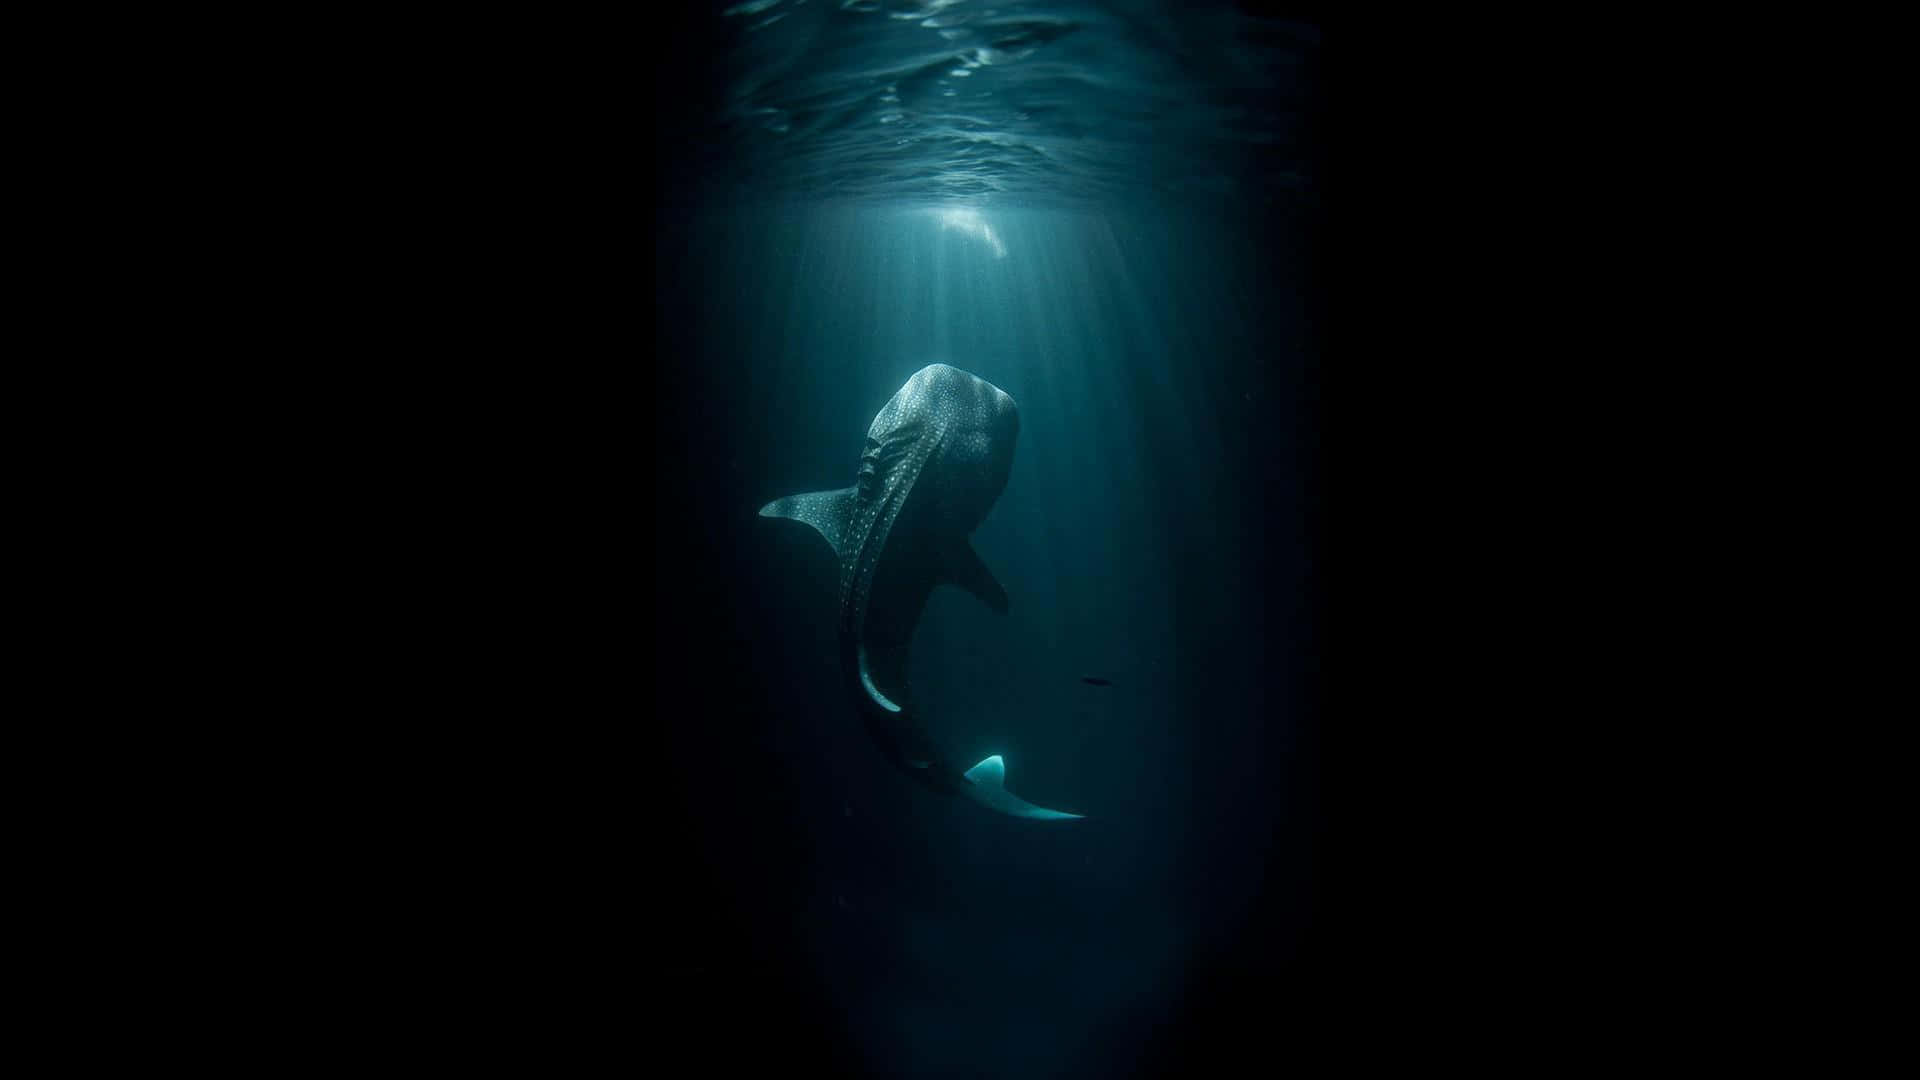 An ominous great white shark lurks in the deep depths of the ocean.